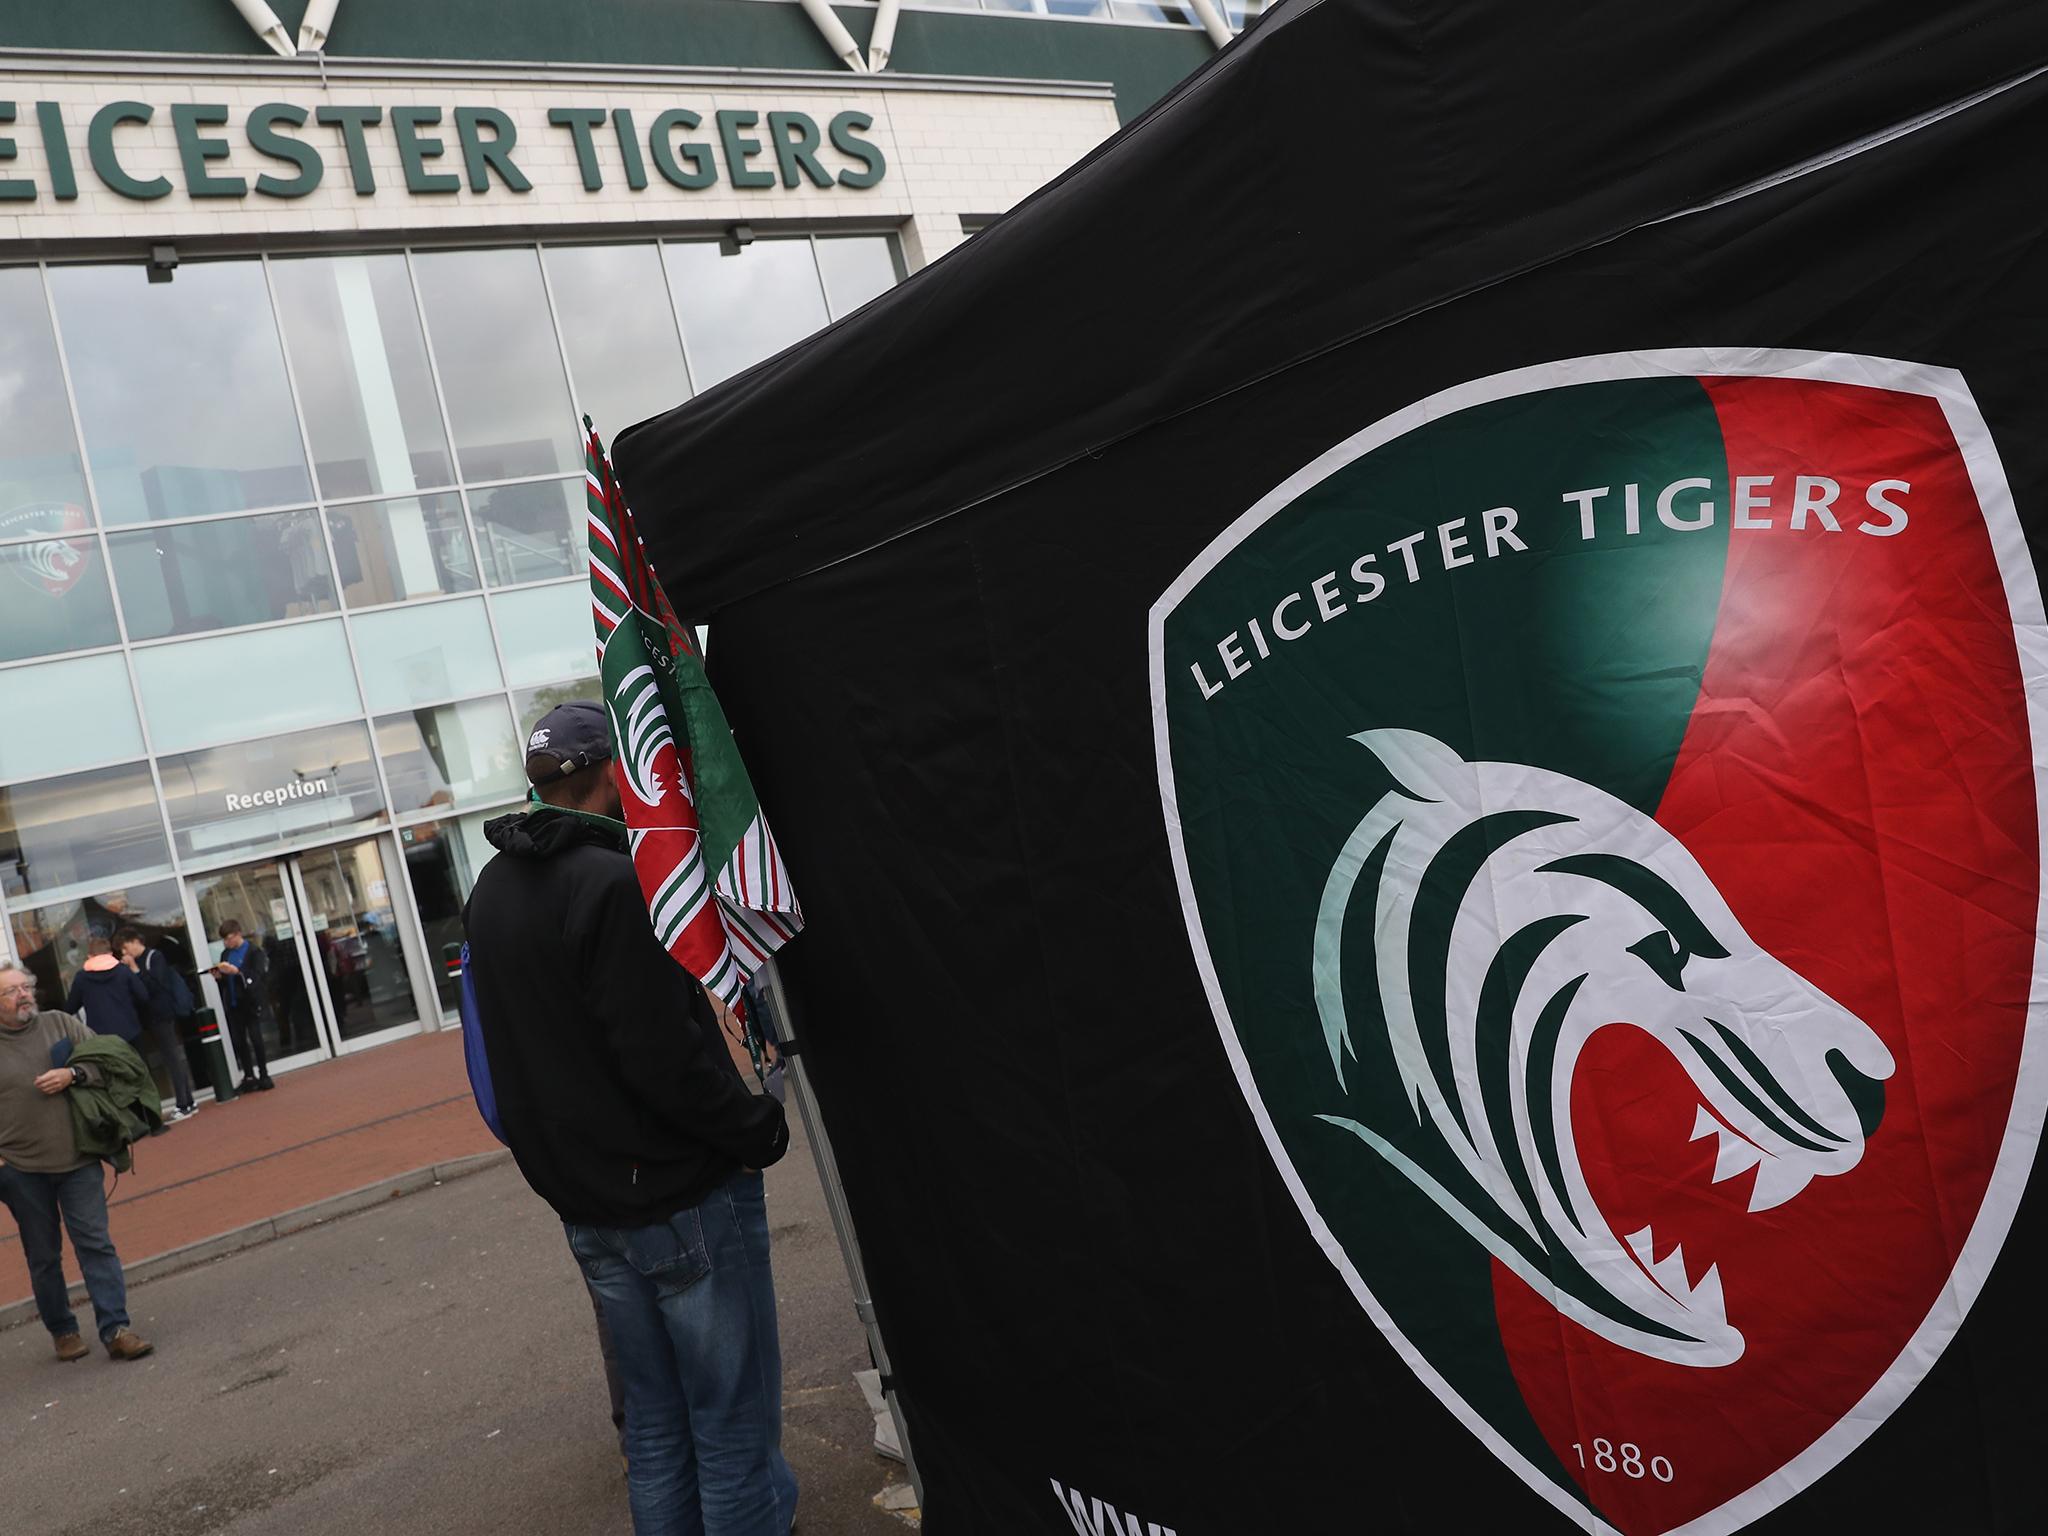 Premiership rugby club Leicester Tigers have been put up for sale